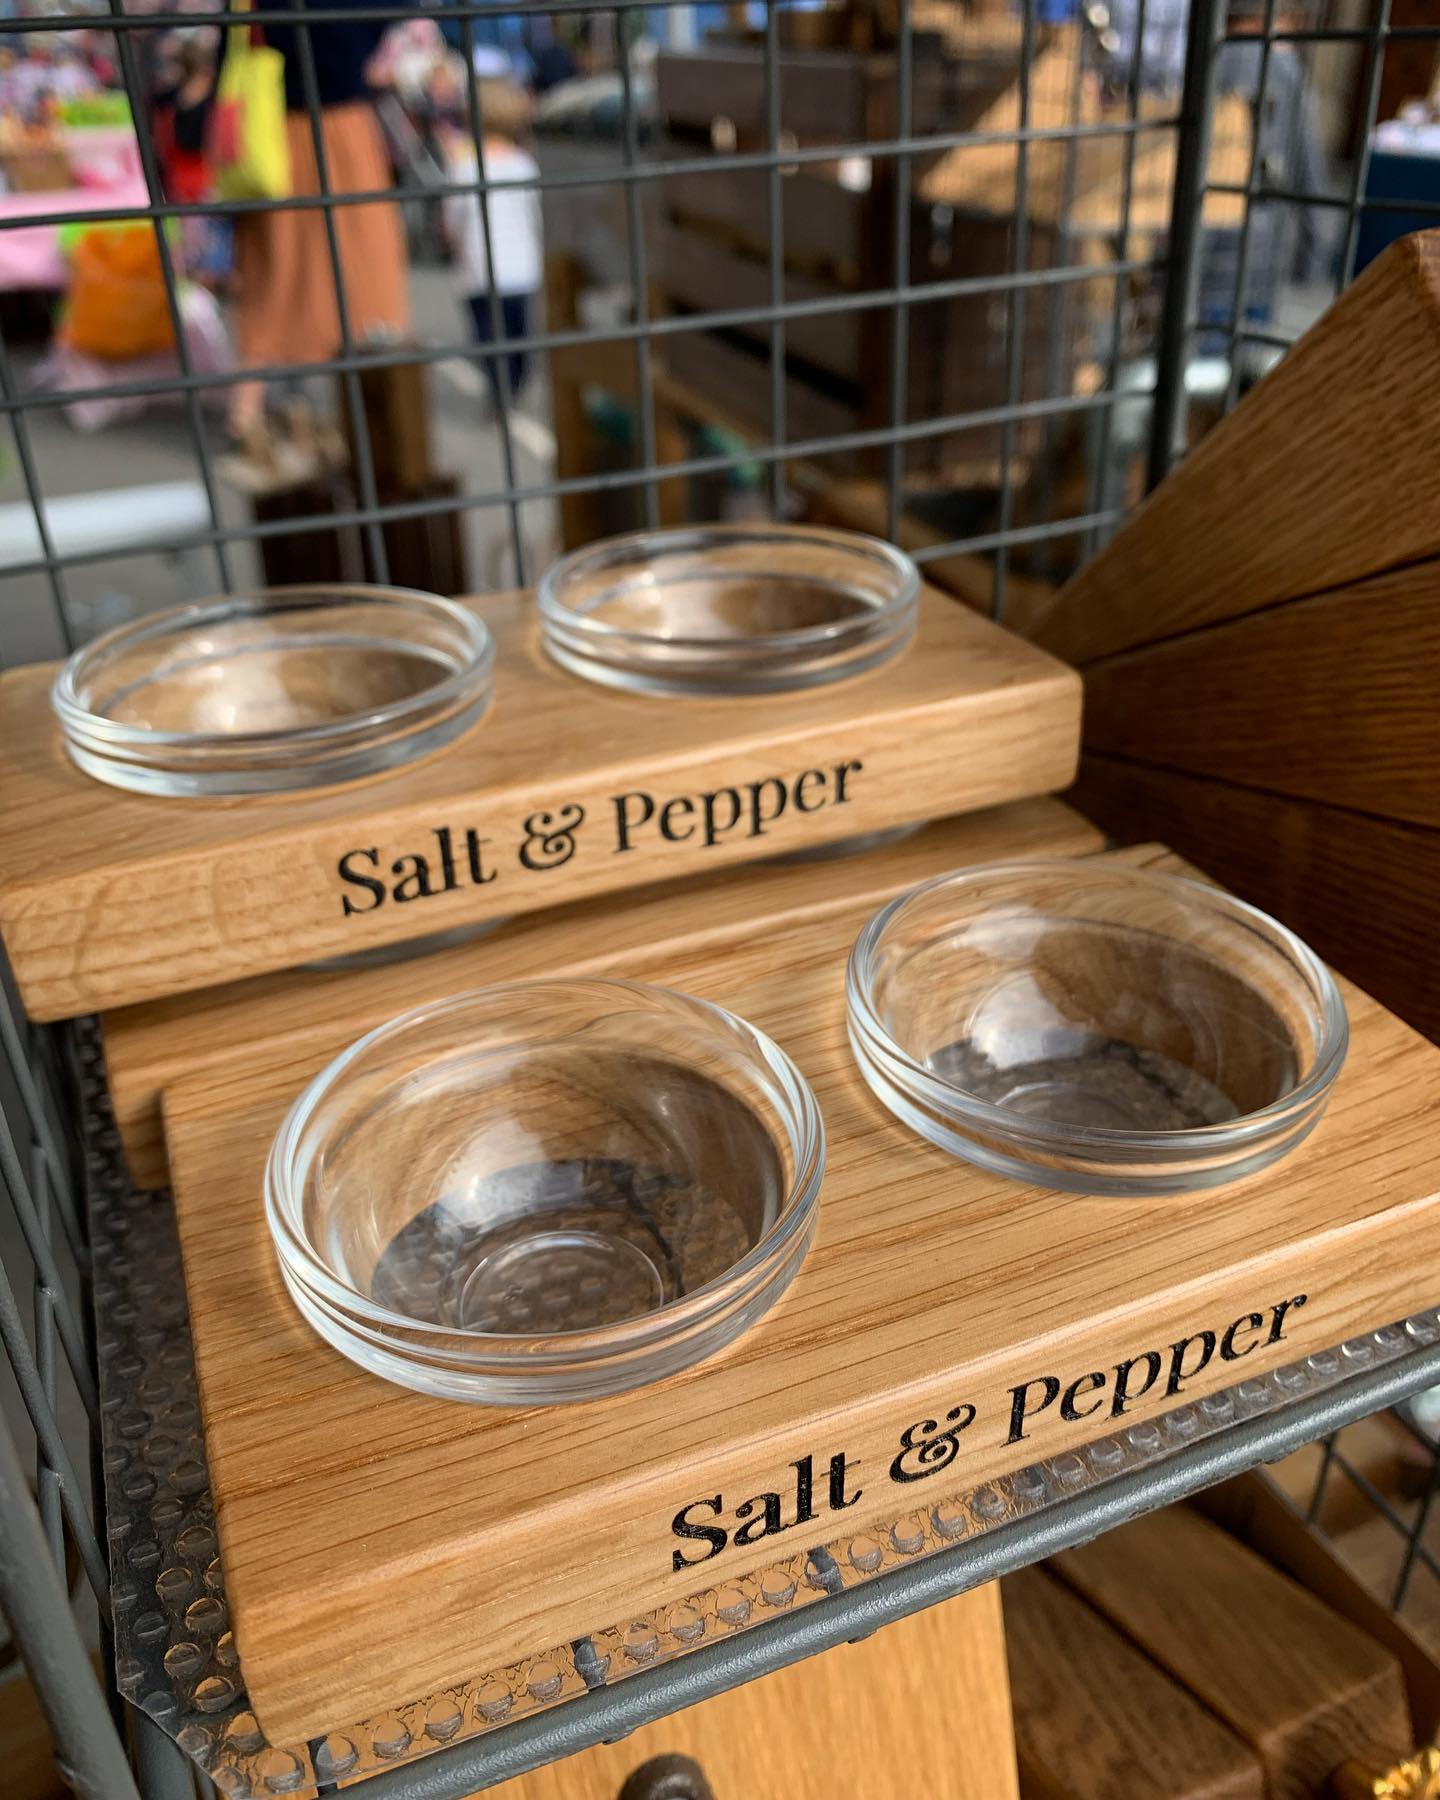 NEW PRODUCT! Our Salt and Pepper Cellars are making their debut at the @malmesburycarnival Petticoat Lane Market today. £15Find us on the High Street!